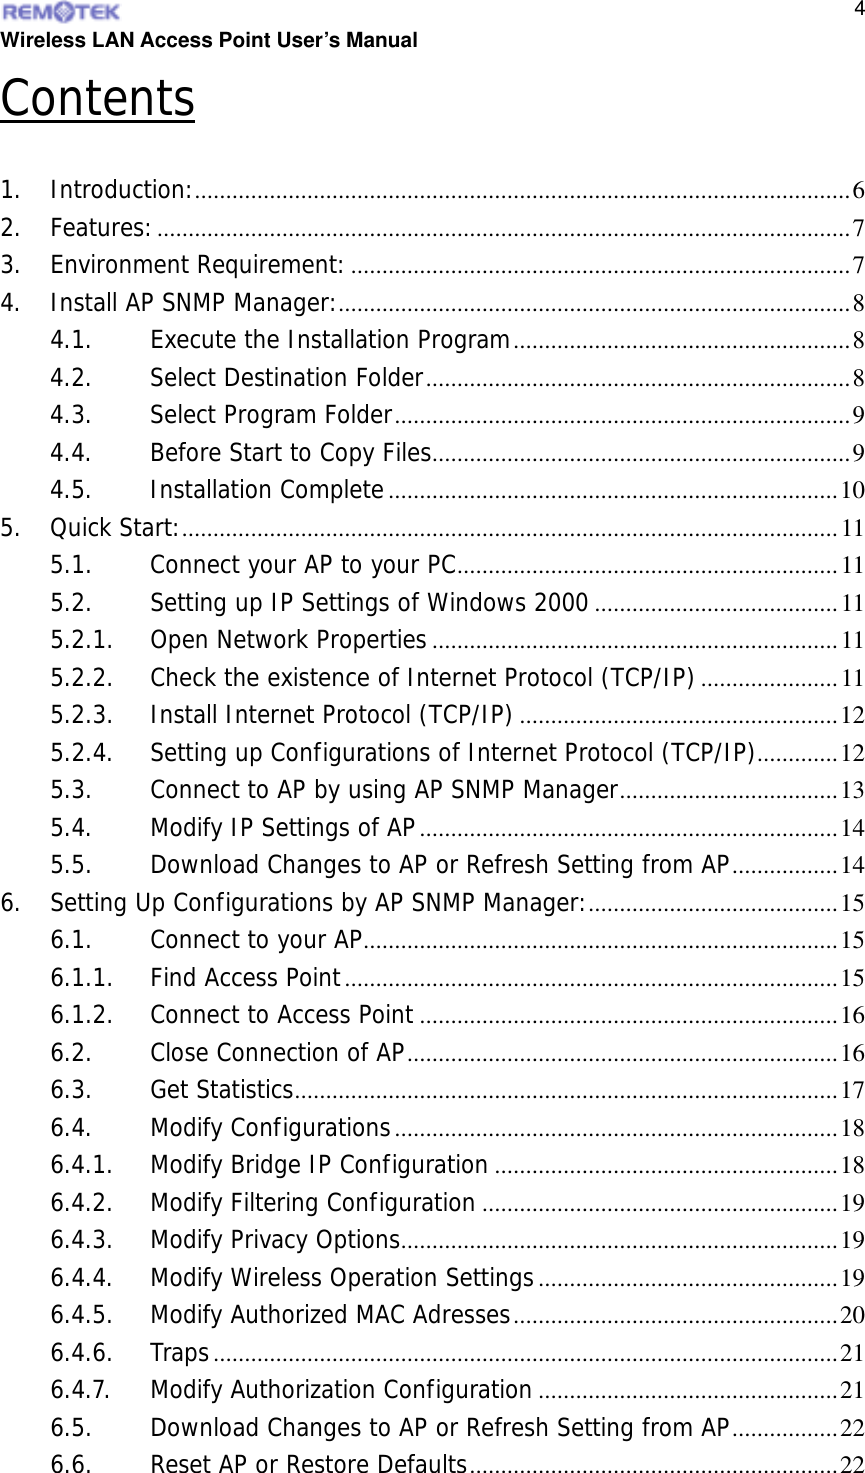  Wireless LAN Access Point User’s Manual  4Contents  1. Introduction:.........................................................................................................6 2. Features:...............................................................................................................7 3. Environment Requirement:................................................................................7 4. Install AP SNMP Manager:..................................................................................8 4.1. Execute the Installation Program......................................................8 4.2. Select Destination Folder....................................................................8 4.3. Select Program Folder.........................................................................9 4.4. Before Start to Copy Files...................................................................9 4.5. Installation Complete........................................................................10 5. Quick Start:.........................................................................................................11 5.1. Connect your AP to your PC.............................................................11 5.2. Setting up IP Settings of Windows 2000.......................................11 5.2.1. Open Network Properties.................................................................11 5.2.2. Check the existence of Internet Protocol (TCP/IP)......................11 5.2.3. Install Internet Protocol (TCP/IP) ...................................................12 5.2.4. Setting up Configurations of Internet Protocol (TCP/IP).............12 5.3. Connect to AP by using AP SNMP Manager...................................13 5.4. Modify IP Settings of AP...................................................................14 5.5. Download Changes to AP or Refresh Setting from AP.................14 6. Setting Up Configurations by AP SNMP Manager:........................................15 6.1. Connect to your AP............................................................................15 6.1.1. Find Access Point...............................................................................15 6.1.2. Connect to Access Point ...................................................................16 6.2. Close Connection of AP.....................................................................16 6.3. Get Statistics.......................................................................................17 6.4. Modify Configurations.......................................................................18 6.4.1. Modify Bridge IP Configuration .......................................................18 6.4.2. Modify Filtering Configuration .........................................................19 6.4.3. Modify Privacy Options......................................................................19 6.4.4. Modify Wireless Operation Settings................................................19 6.4.5. Modify Authorized MAC Adresses....................................................20 6.4.6. Traps ....................................................................................................21 6.4.7. Modify Authorization Configuration................................................21 6.5. Download Changes to AP or Refresh Setting from AP.................22 6.6. Reset AP or Restore Defaults...........................................................22 